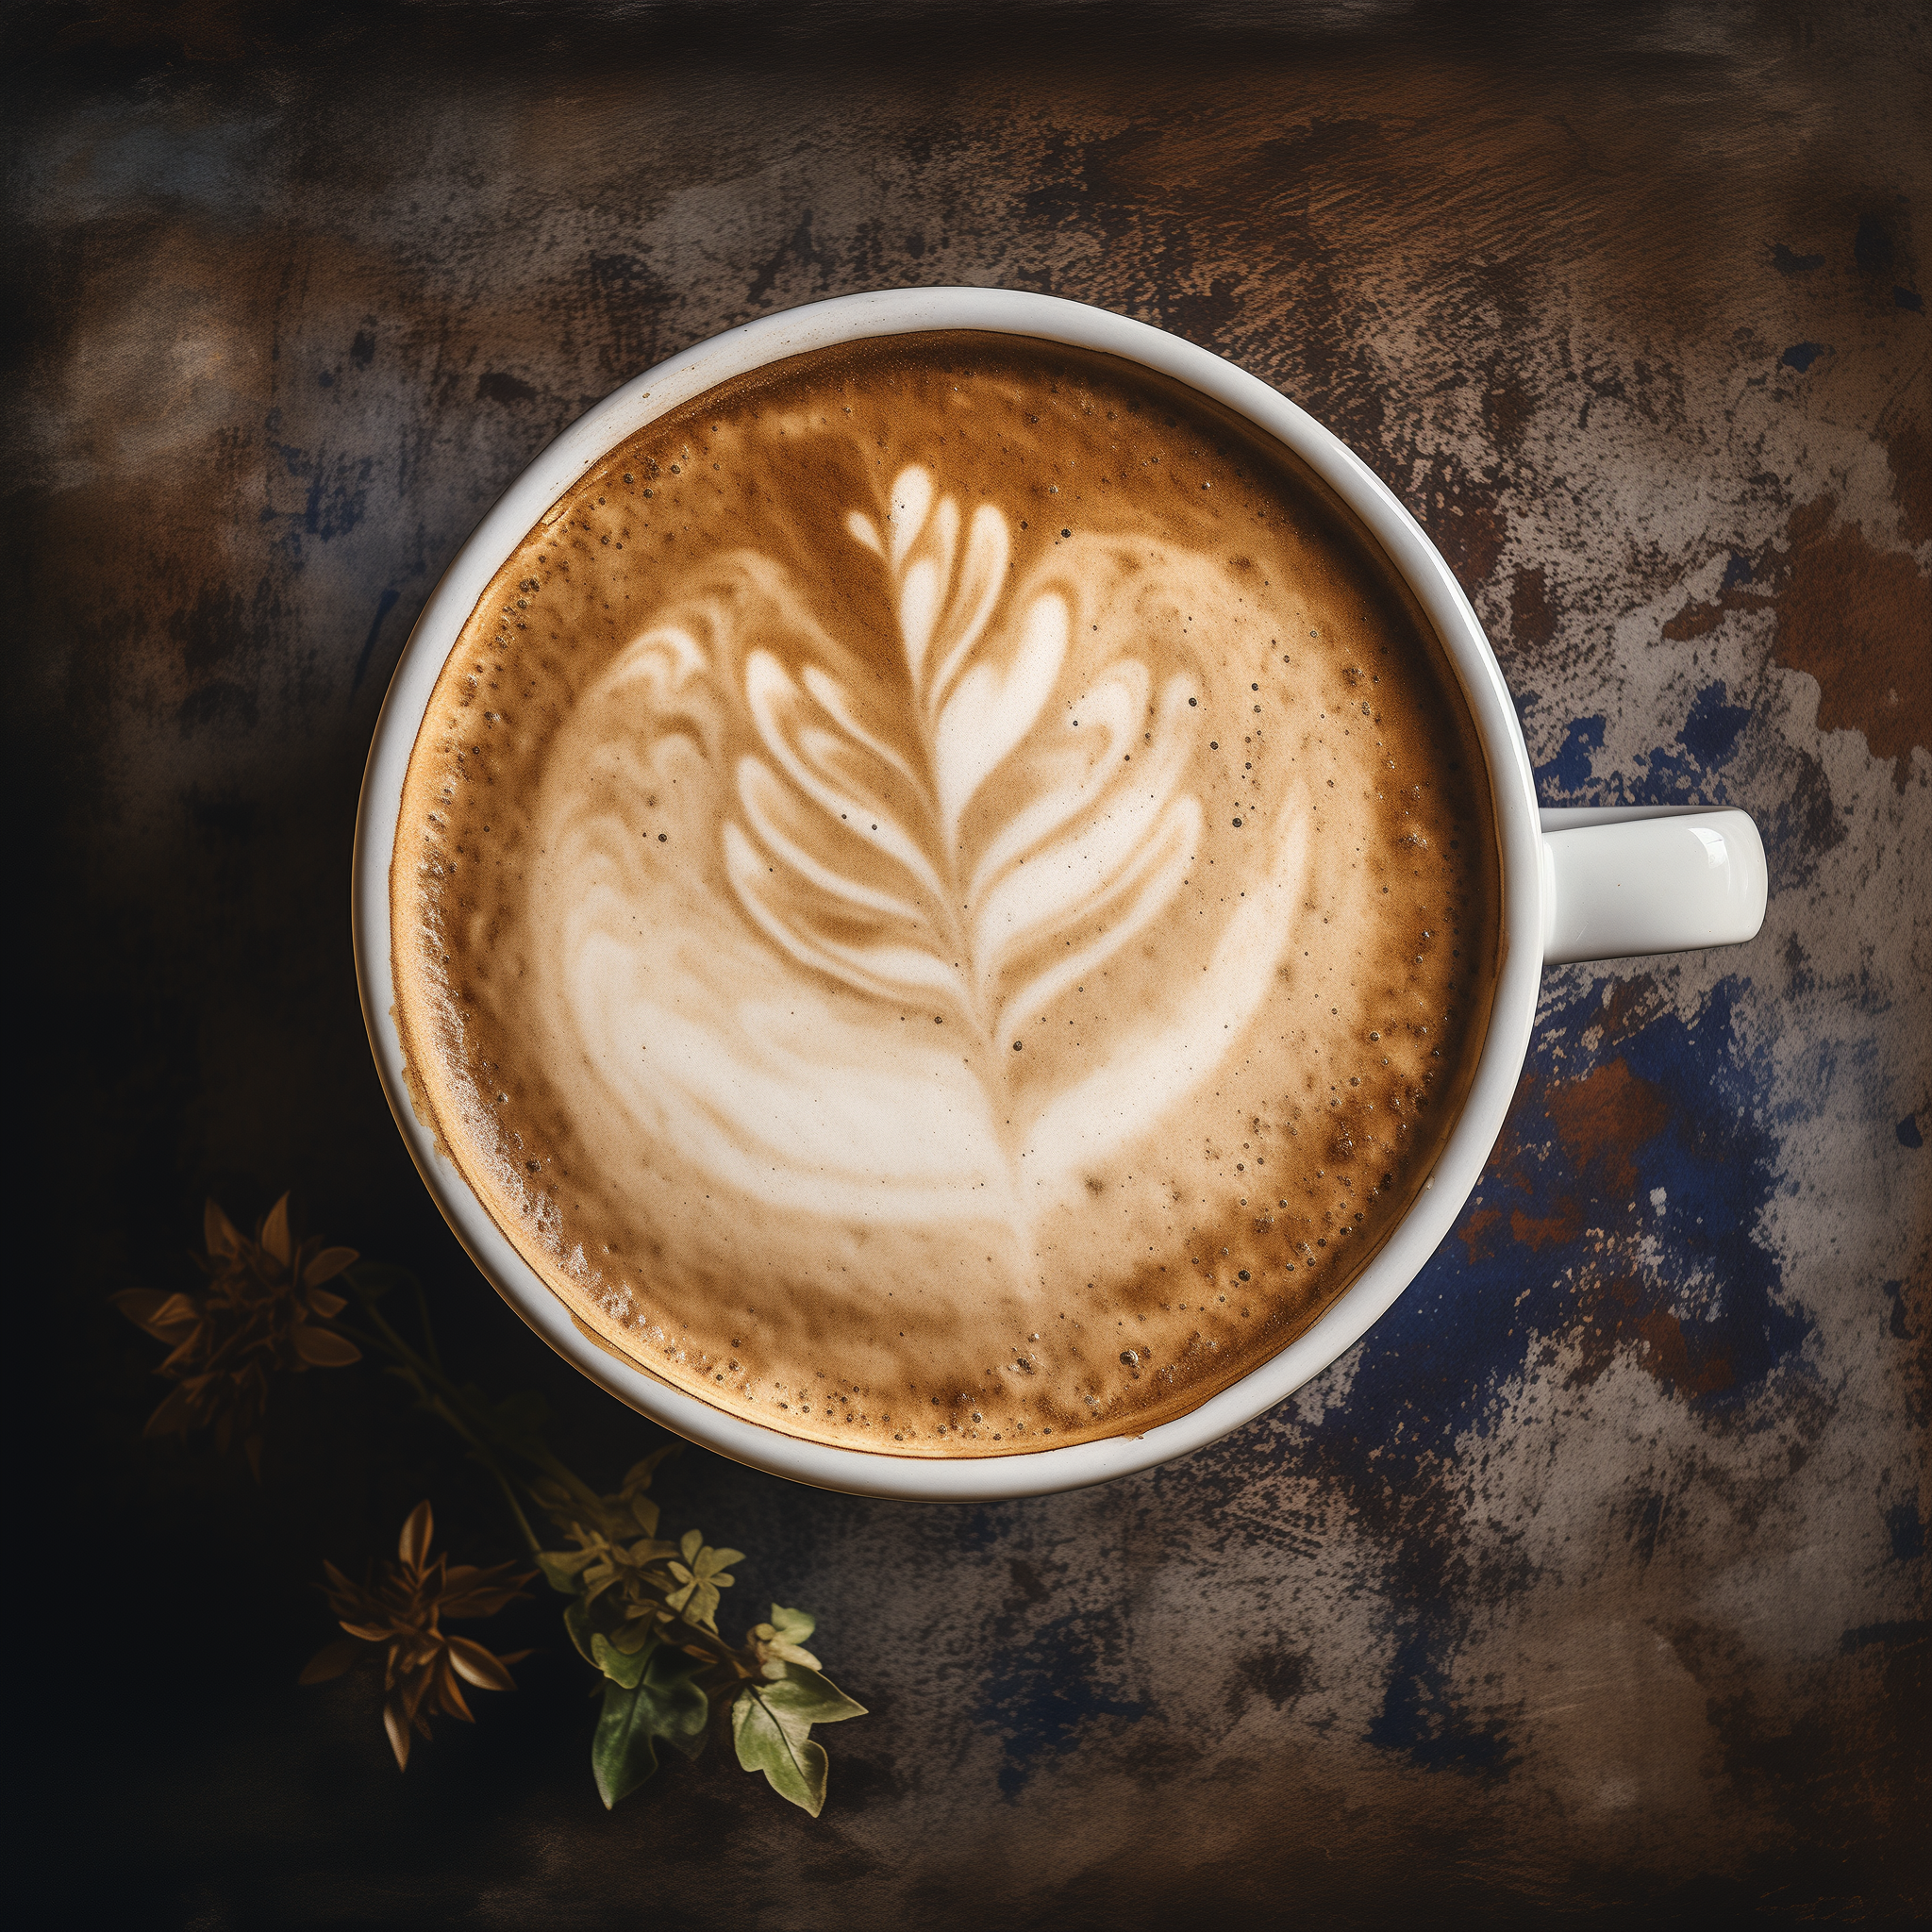 Alt-text: A perfectly crafted latte with intricate leaf-patterned latte art, ideal for a cozy coffee-themed avatar or profile picture.